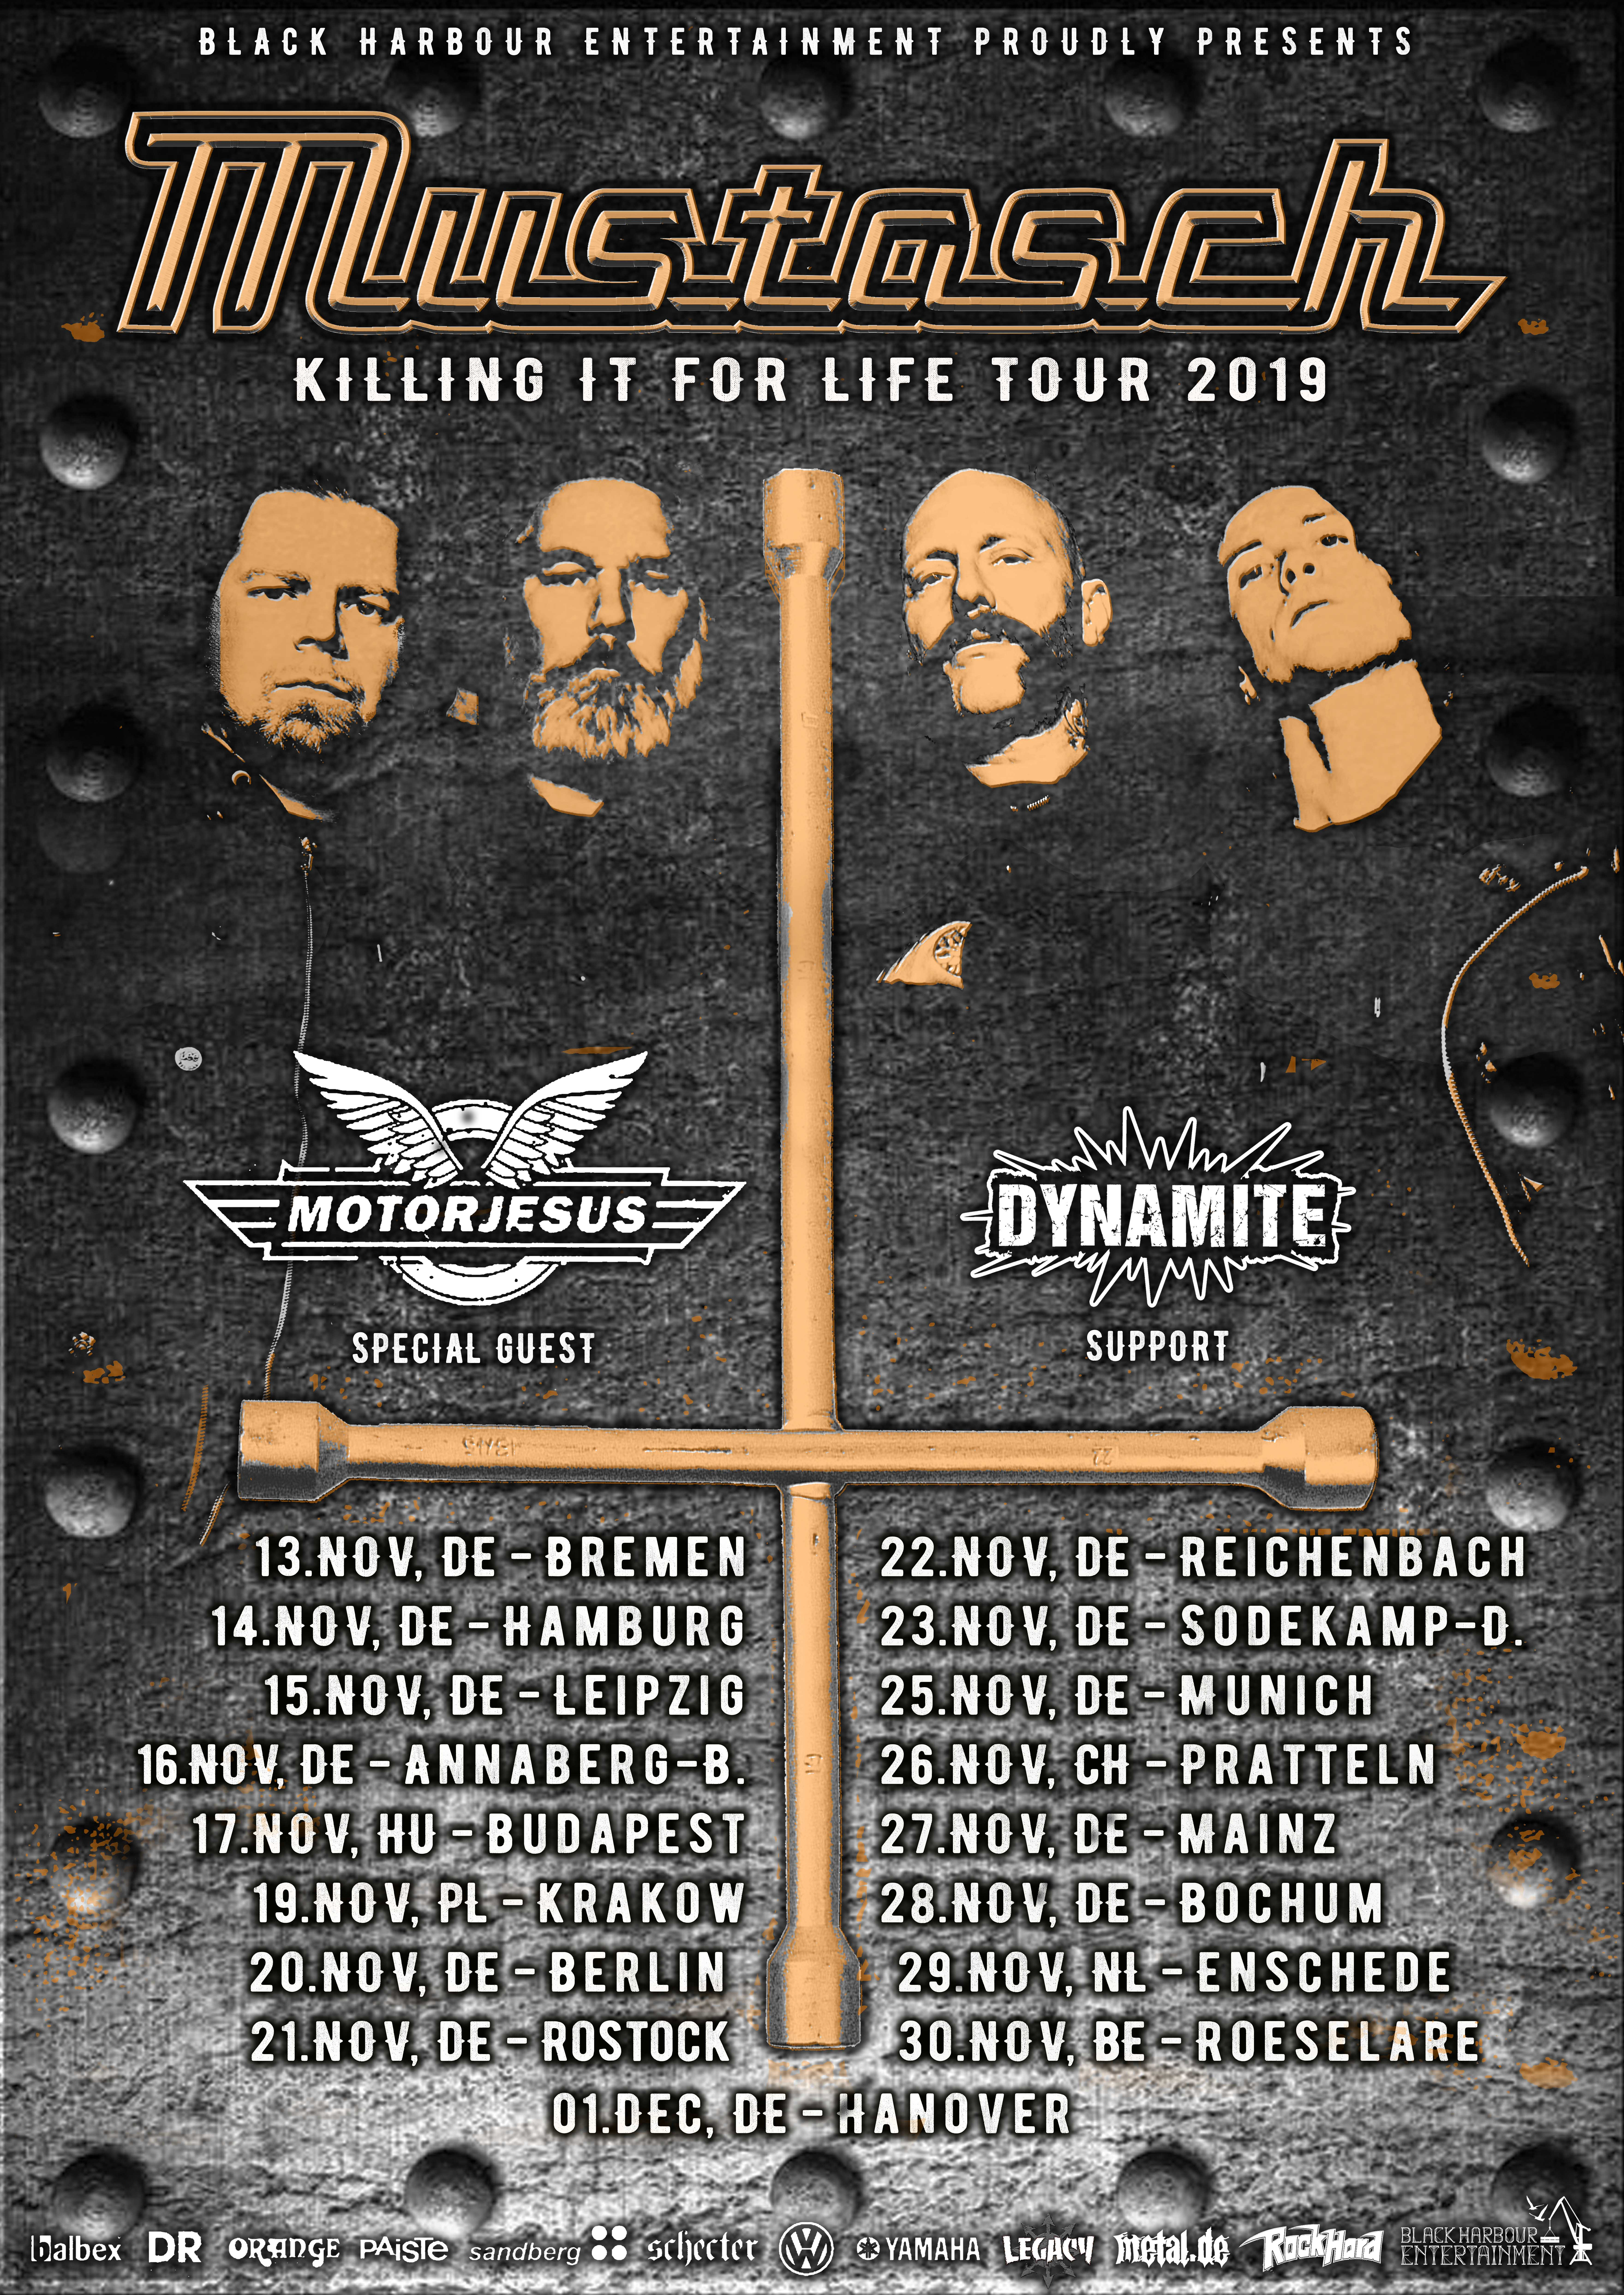 Mustasch Killing For Live Tour 2019